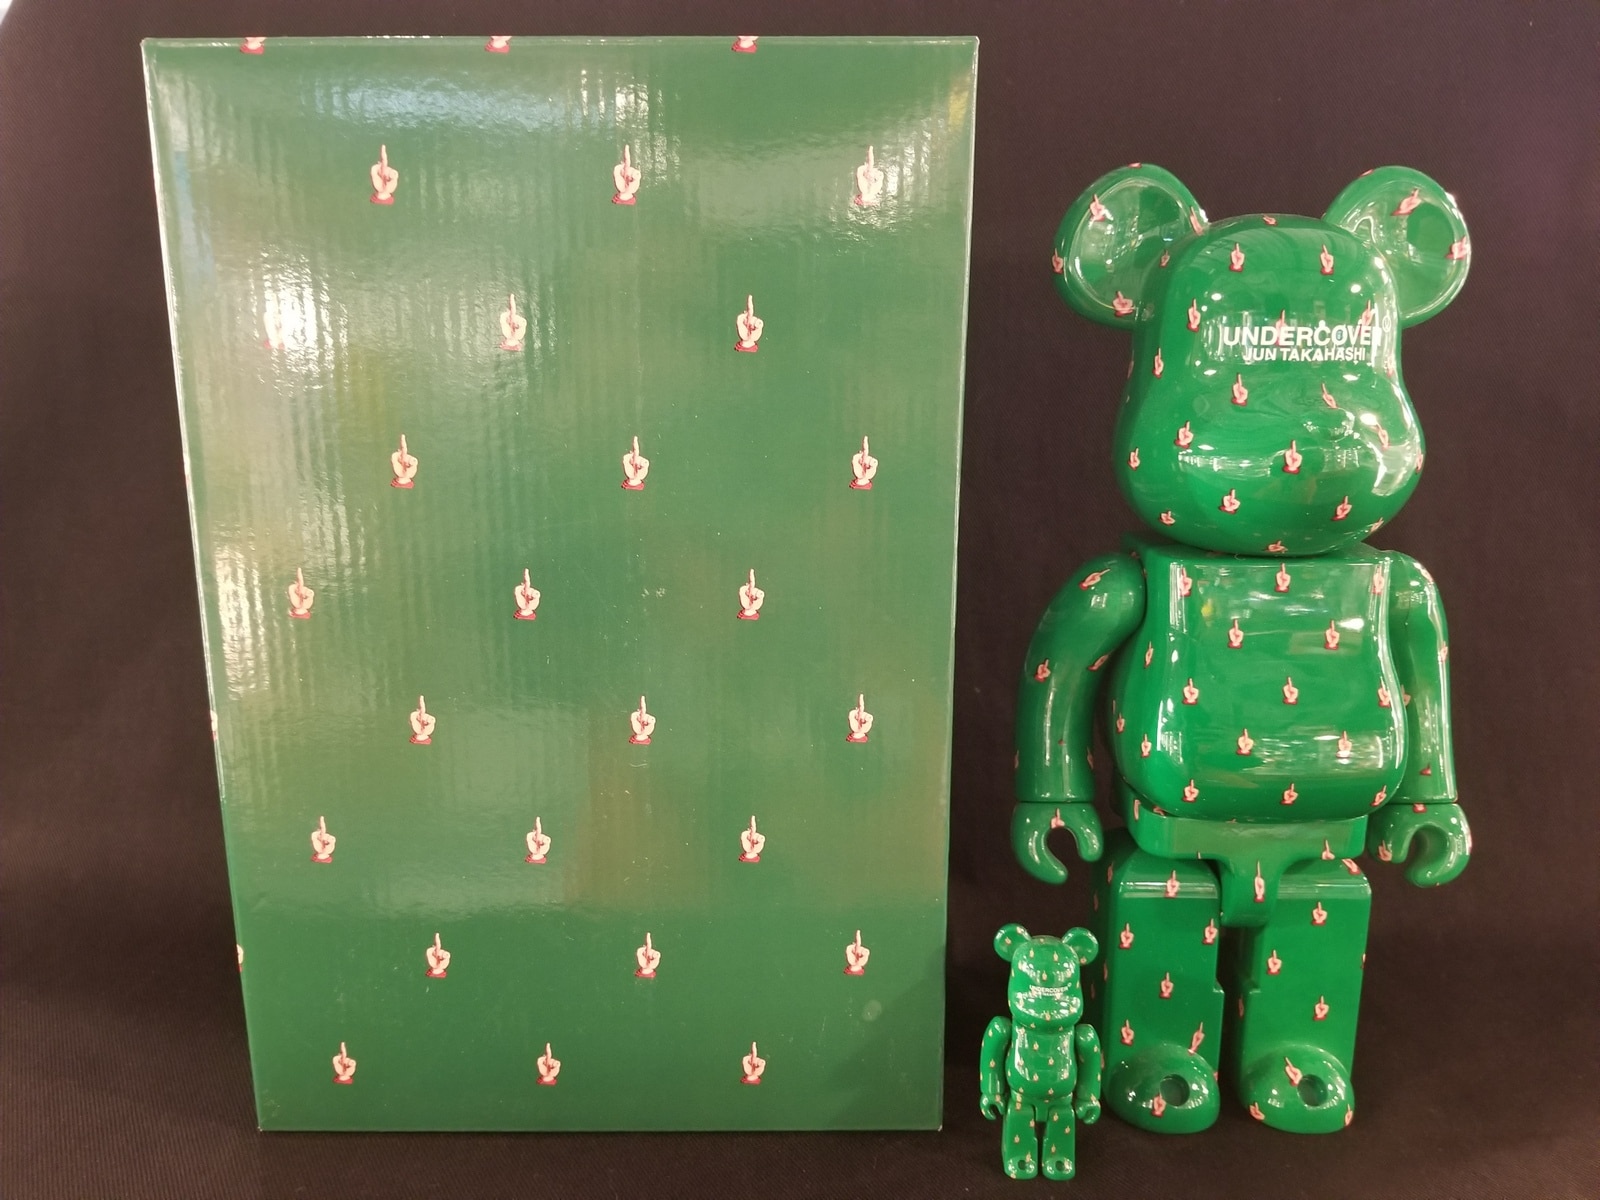 BE@RBRICK UNDERCOVER